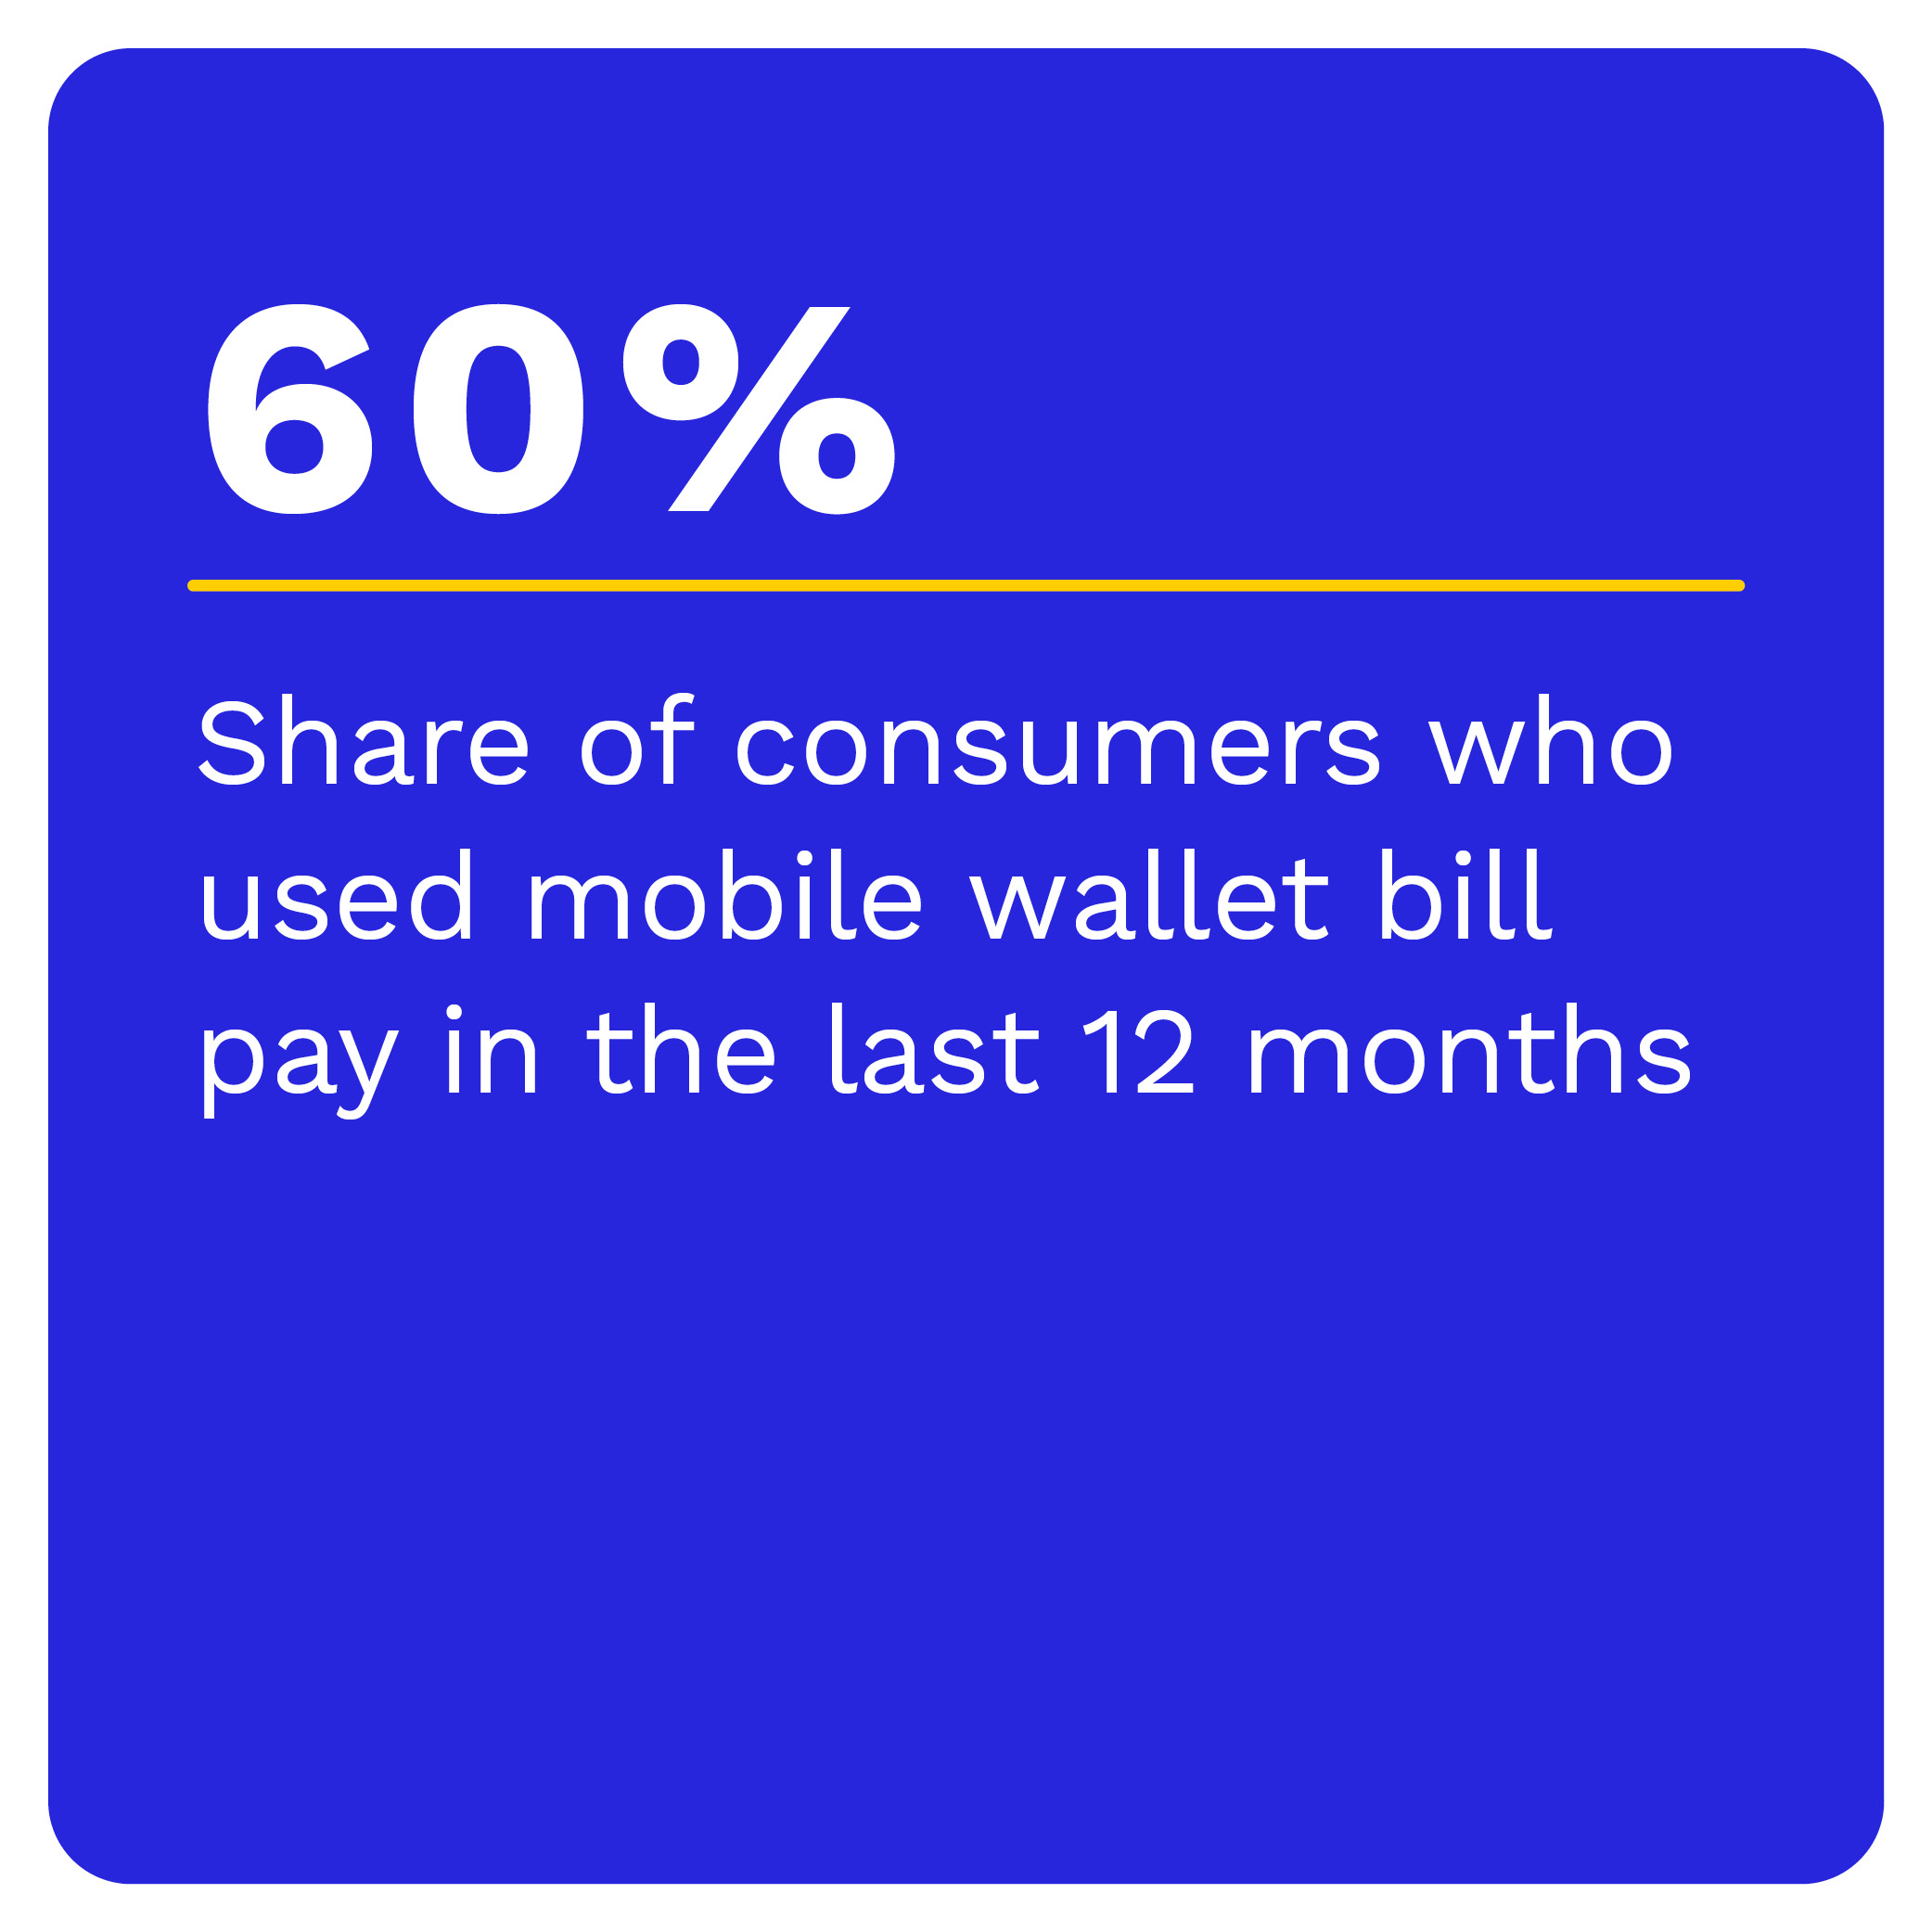 60%: Share of consumers who used mobile wallet bill pay in the last 12 months